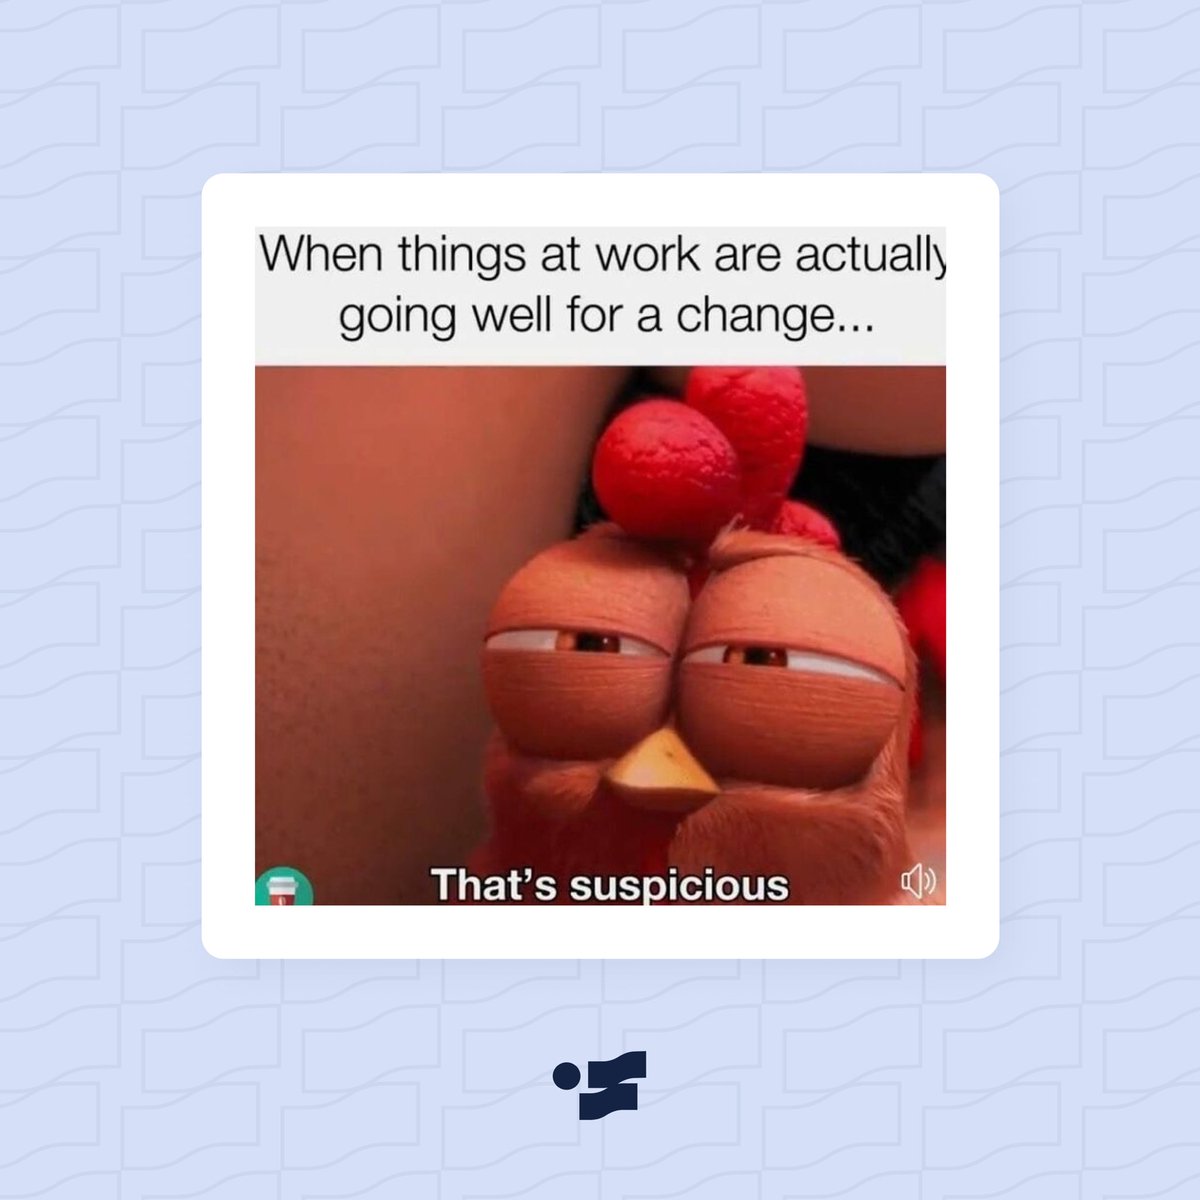 This is the life automation brings, it doesn’t call for suspicion. Embrace it!

#workmemes #memes #tgif #taskautomation